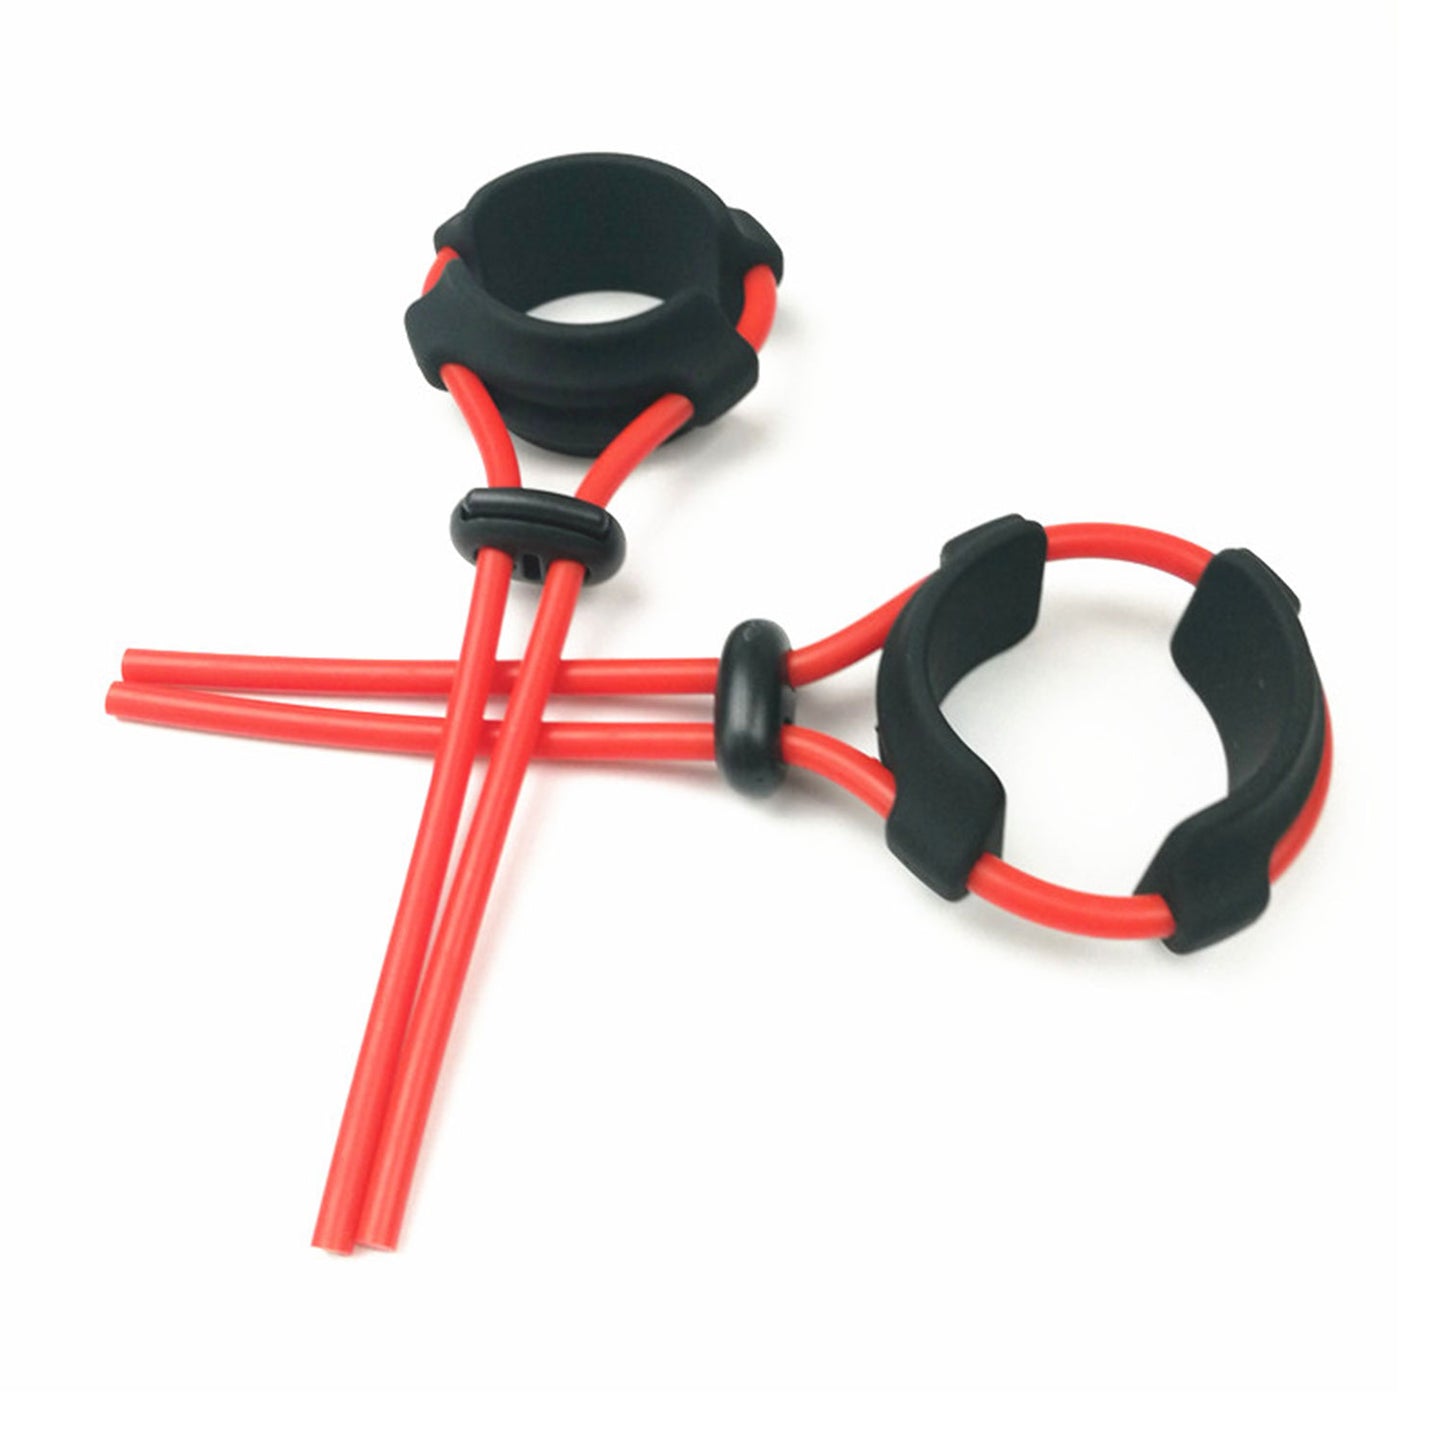 The Horny Company - John O Adjustable Silicone Cock Ring with Attachments